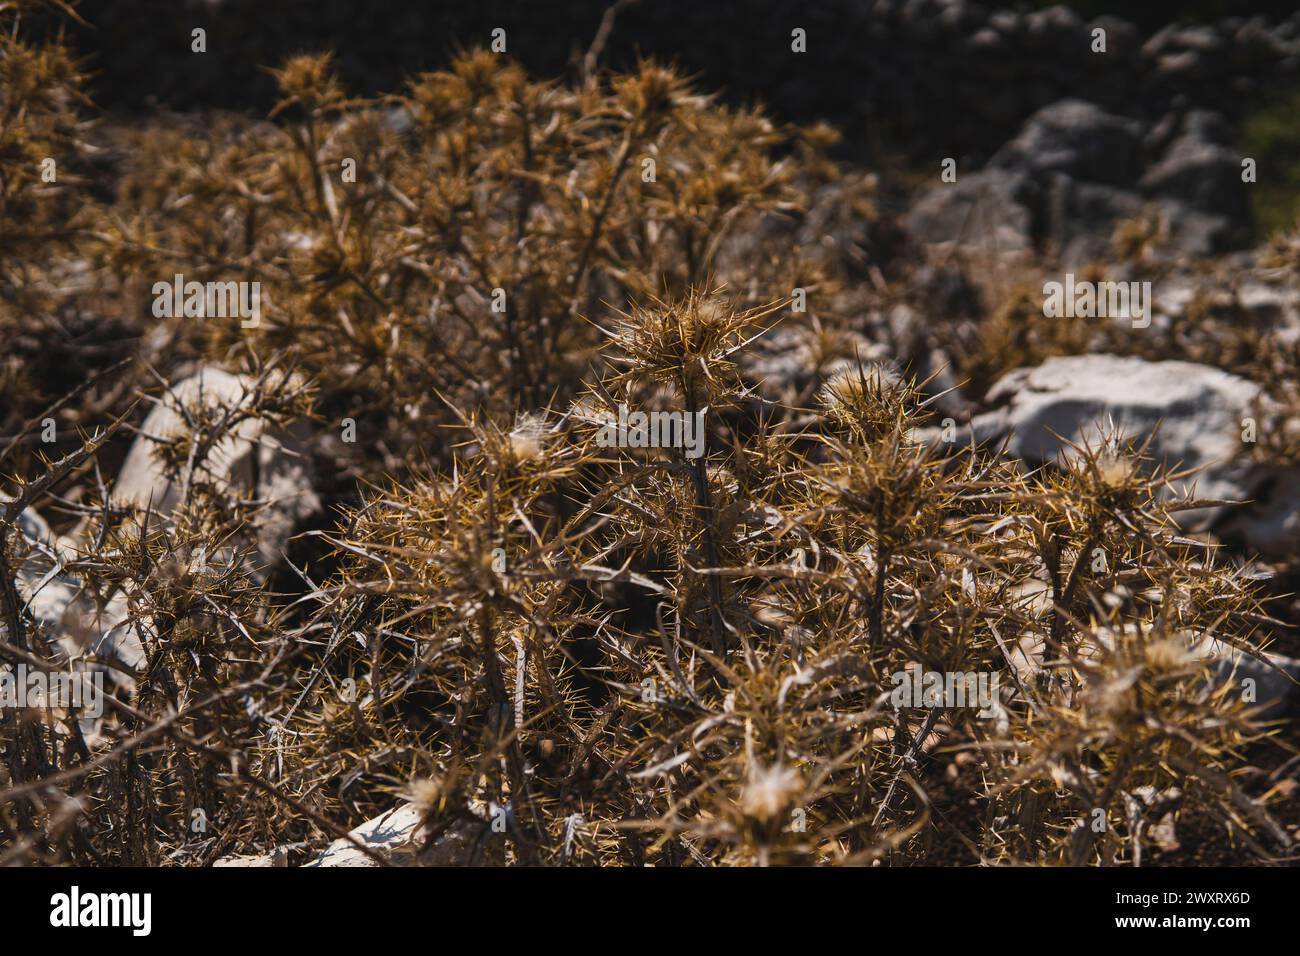 old plants withered due to drought in mediterranean region Stock Photo